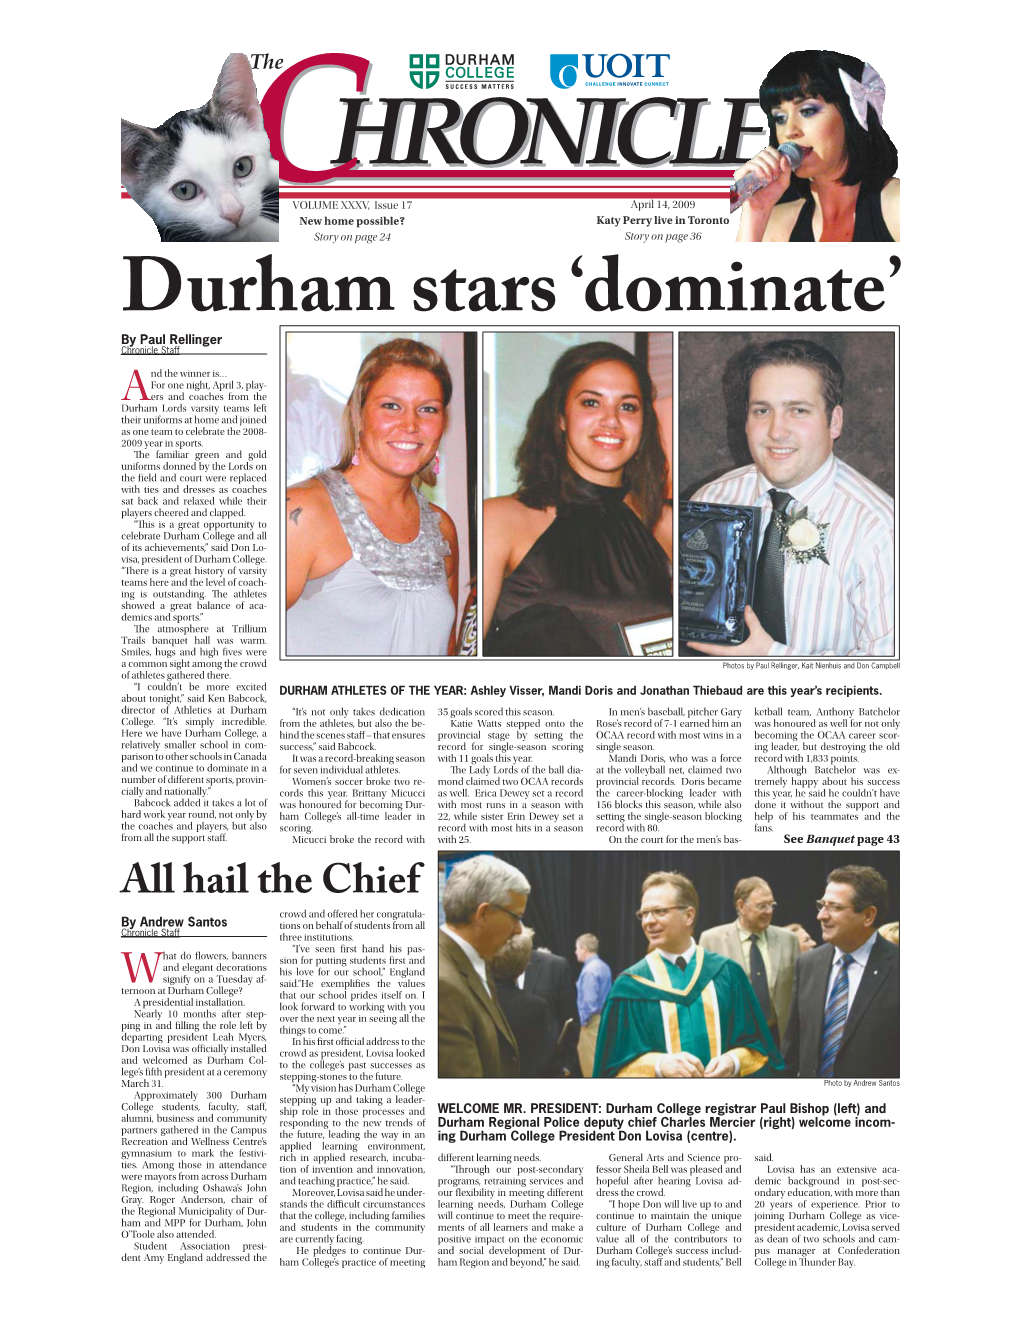 Durham Stars ‘Dominate’ by Paul Rellinger Chronicle Staff